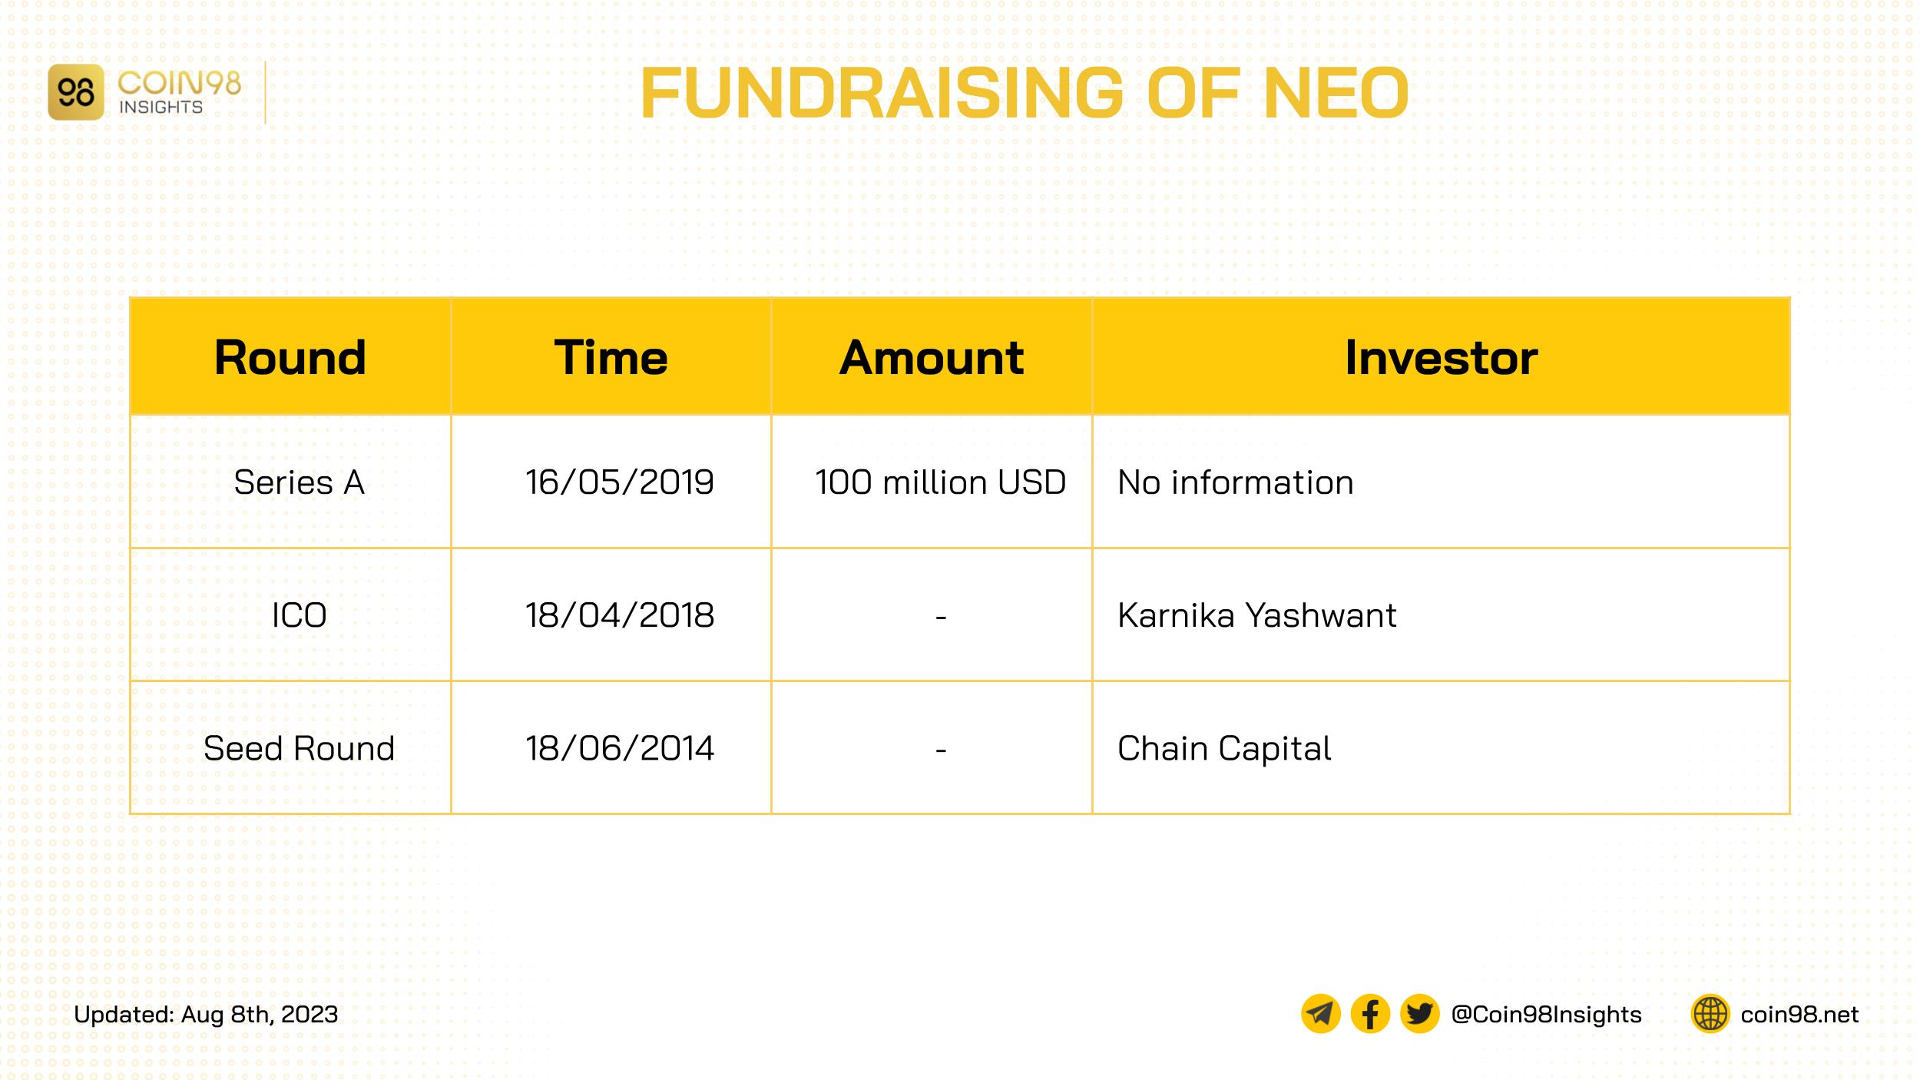 neo has gone through 3 rounds of fundraising with total around 100 million USD